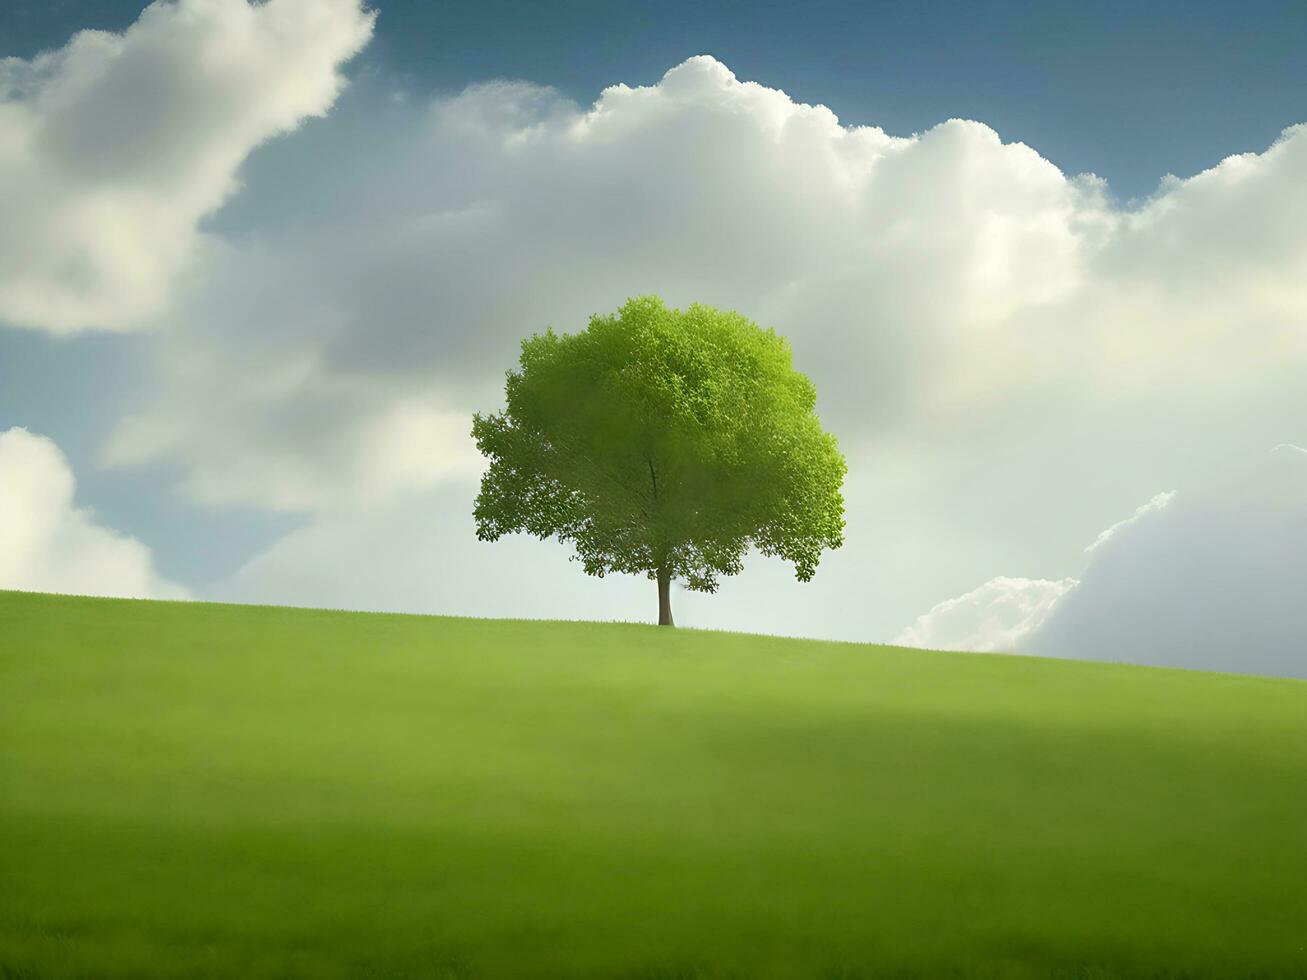 Single tree growing on a grassy landscape generated by ai photo